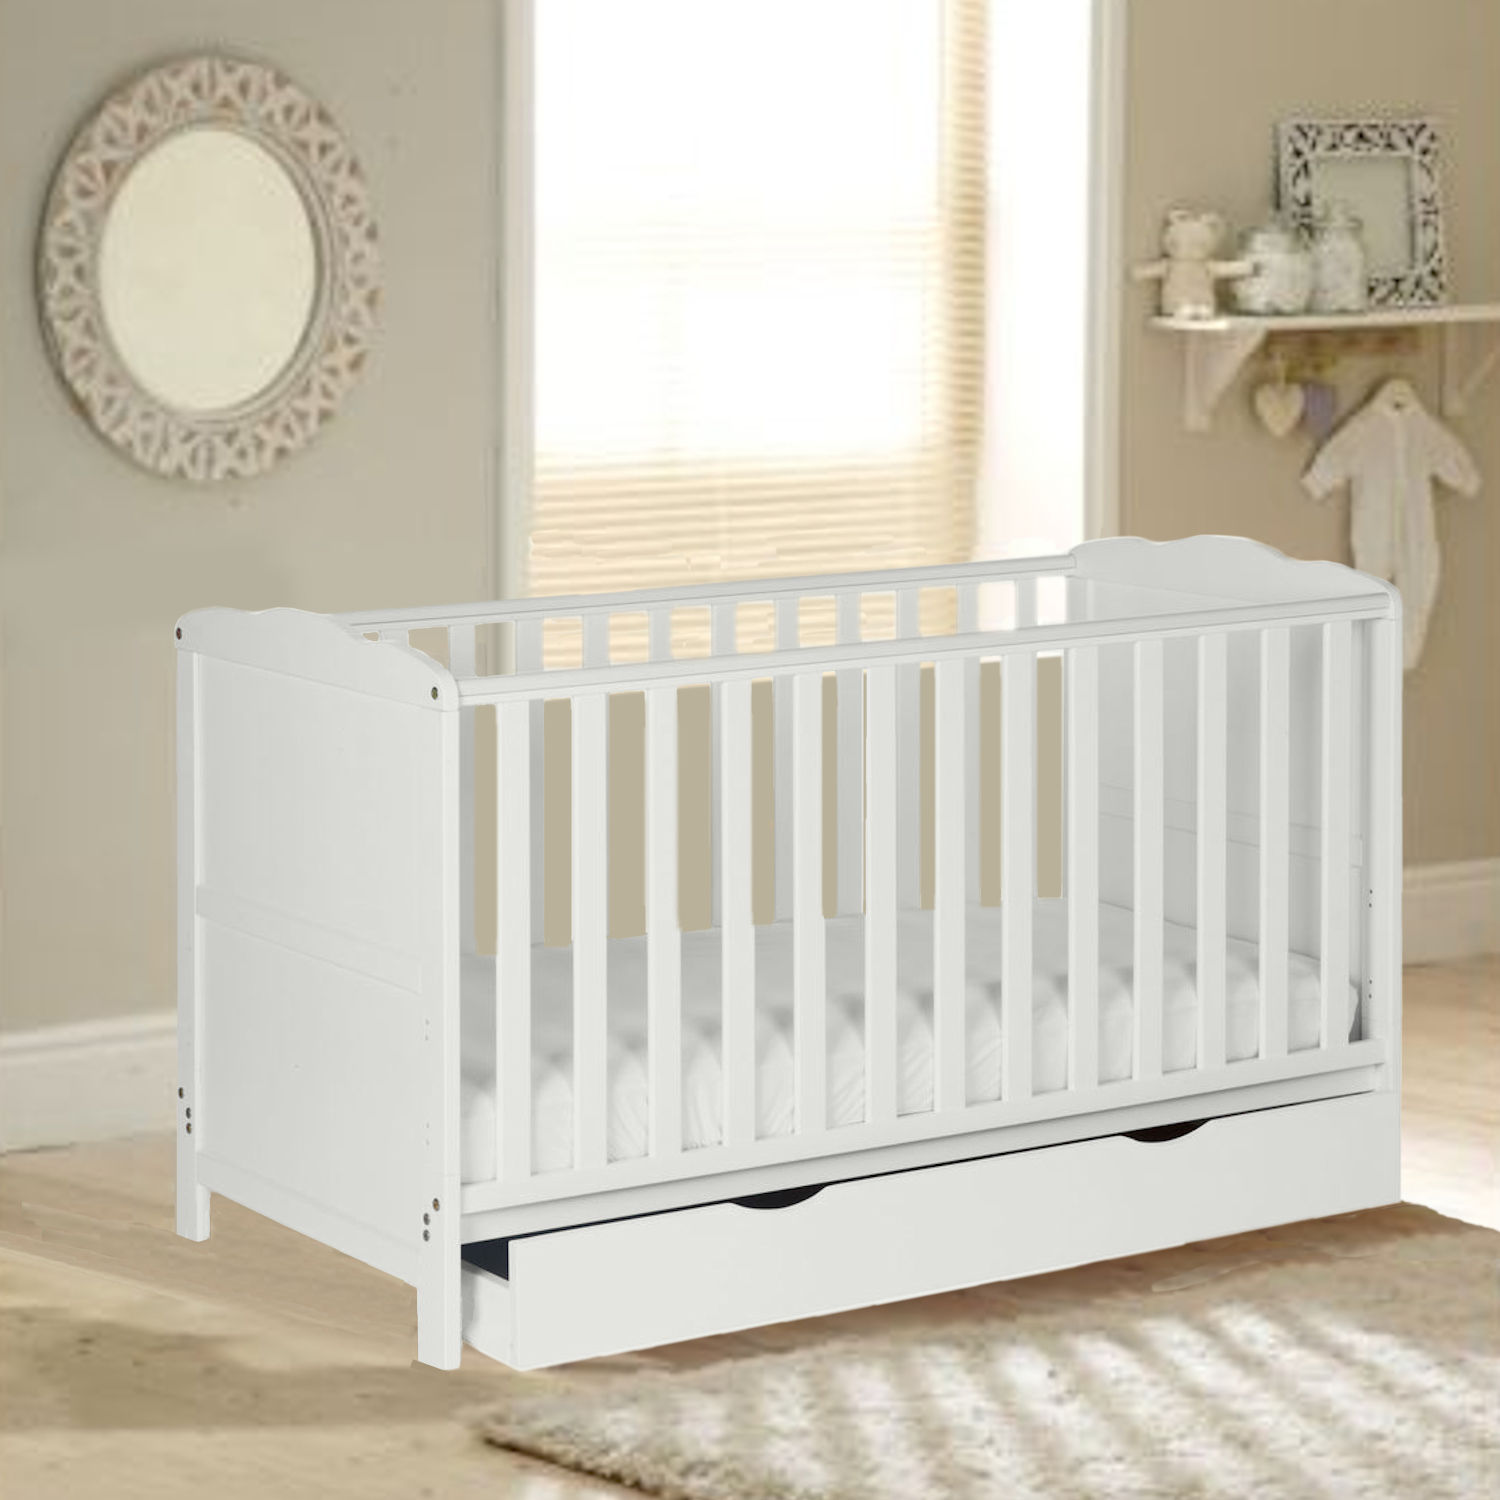 4baby Classic Cot Bed With Drawer Deluxe Foam Mattress White